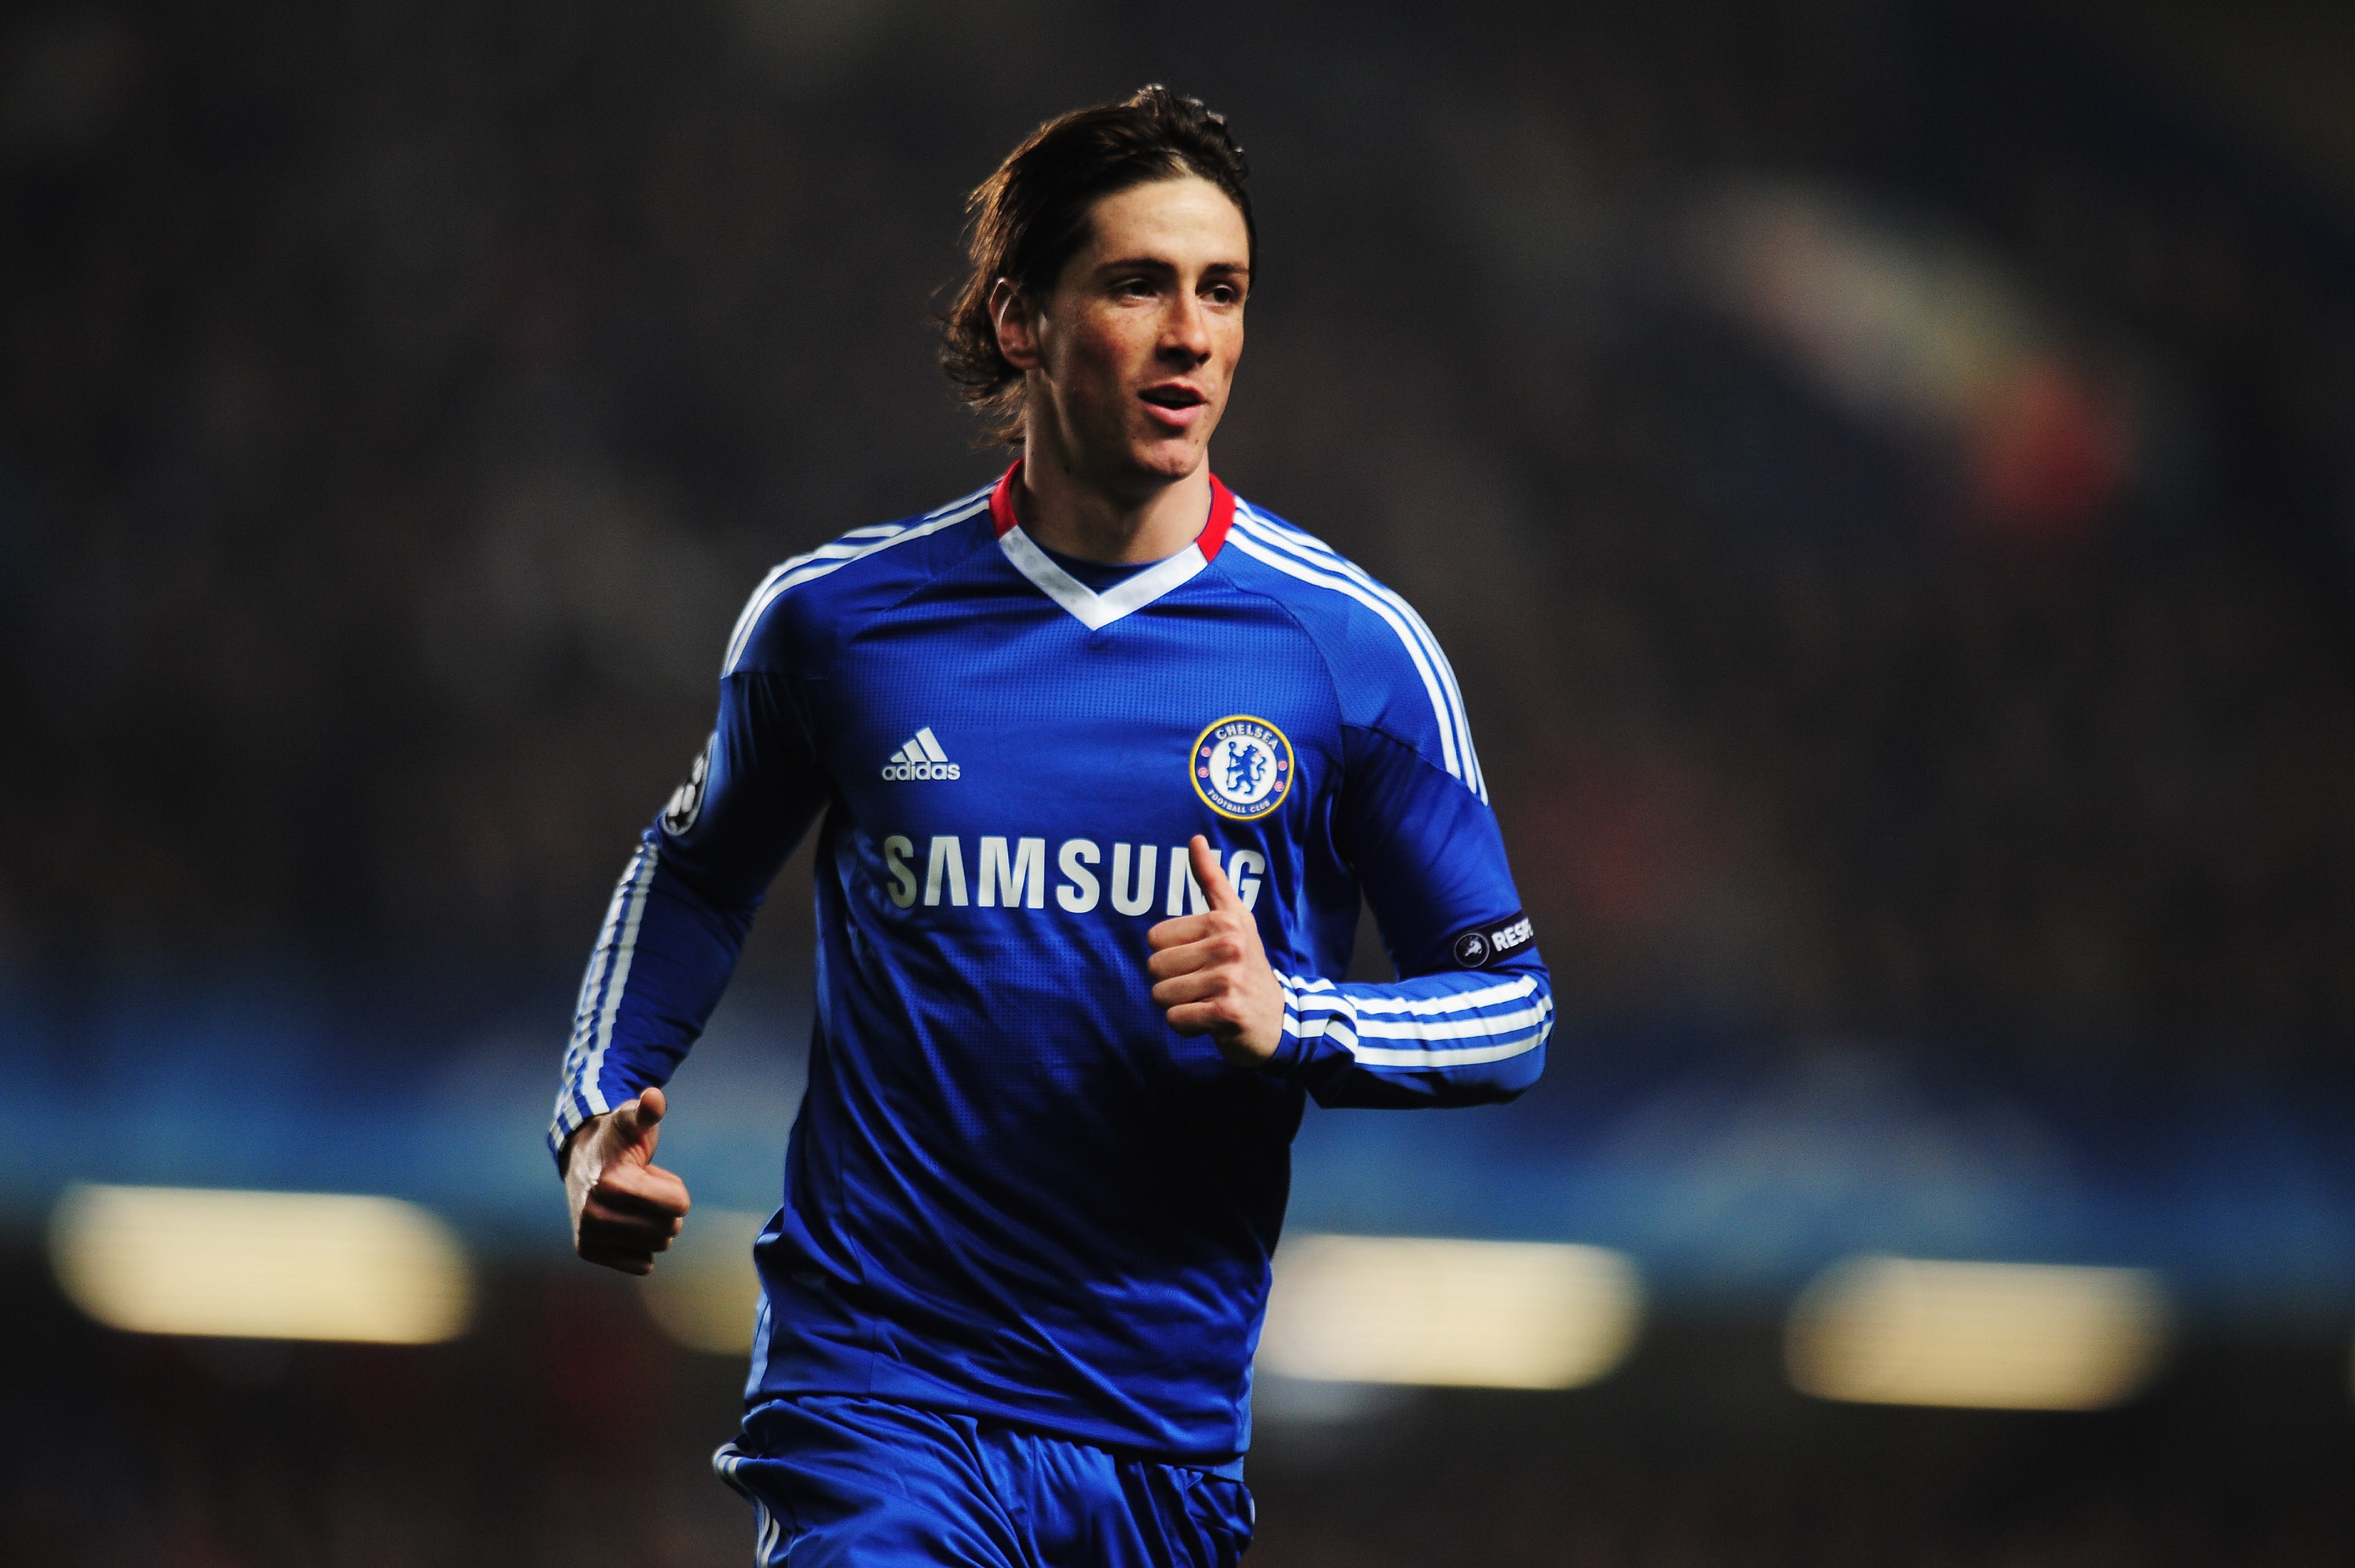 LONDON, UNITED KINGDOM - MARCH 16:  Fernando Torres of Chelsea in action during the UEFA Champions League round of sixteen second leg match between Chelsea and FC Copenhagen at Stamford Bridge on March 16, 2011 in London, England.  (Photo by Shaun Botteri